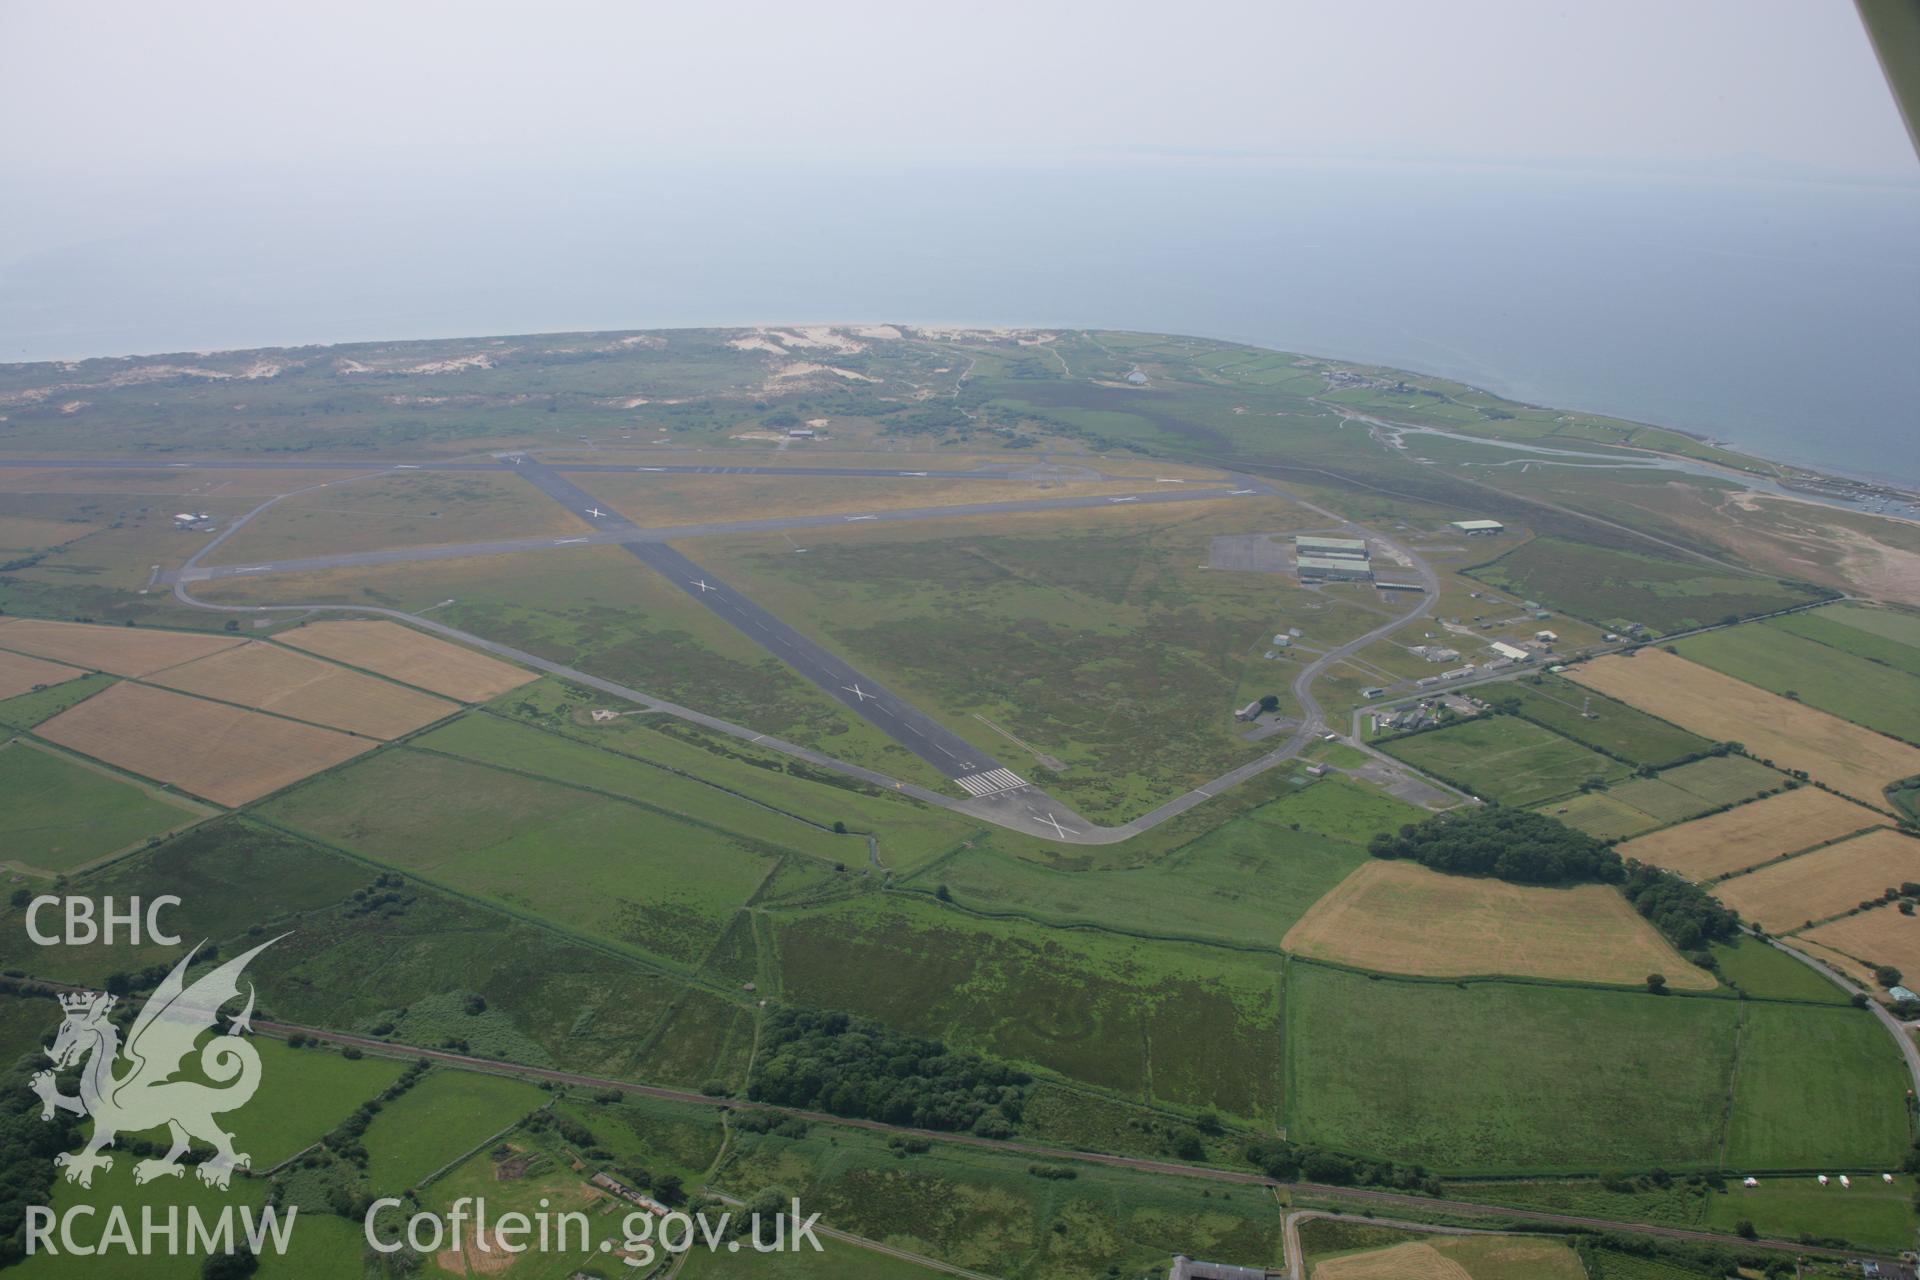 RCAHMW colour oblique aerial photograph of Llanbedr Airfield. Taken on 04 July 2006 by Toby Driver.